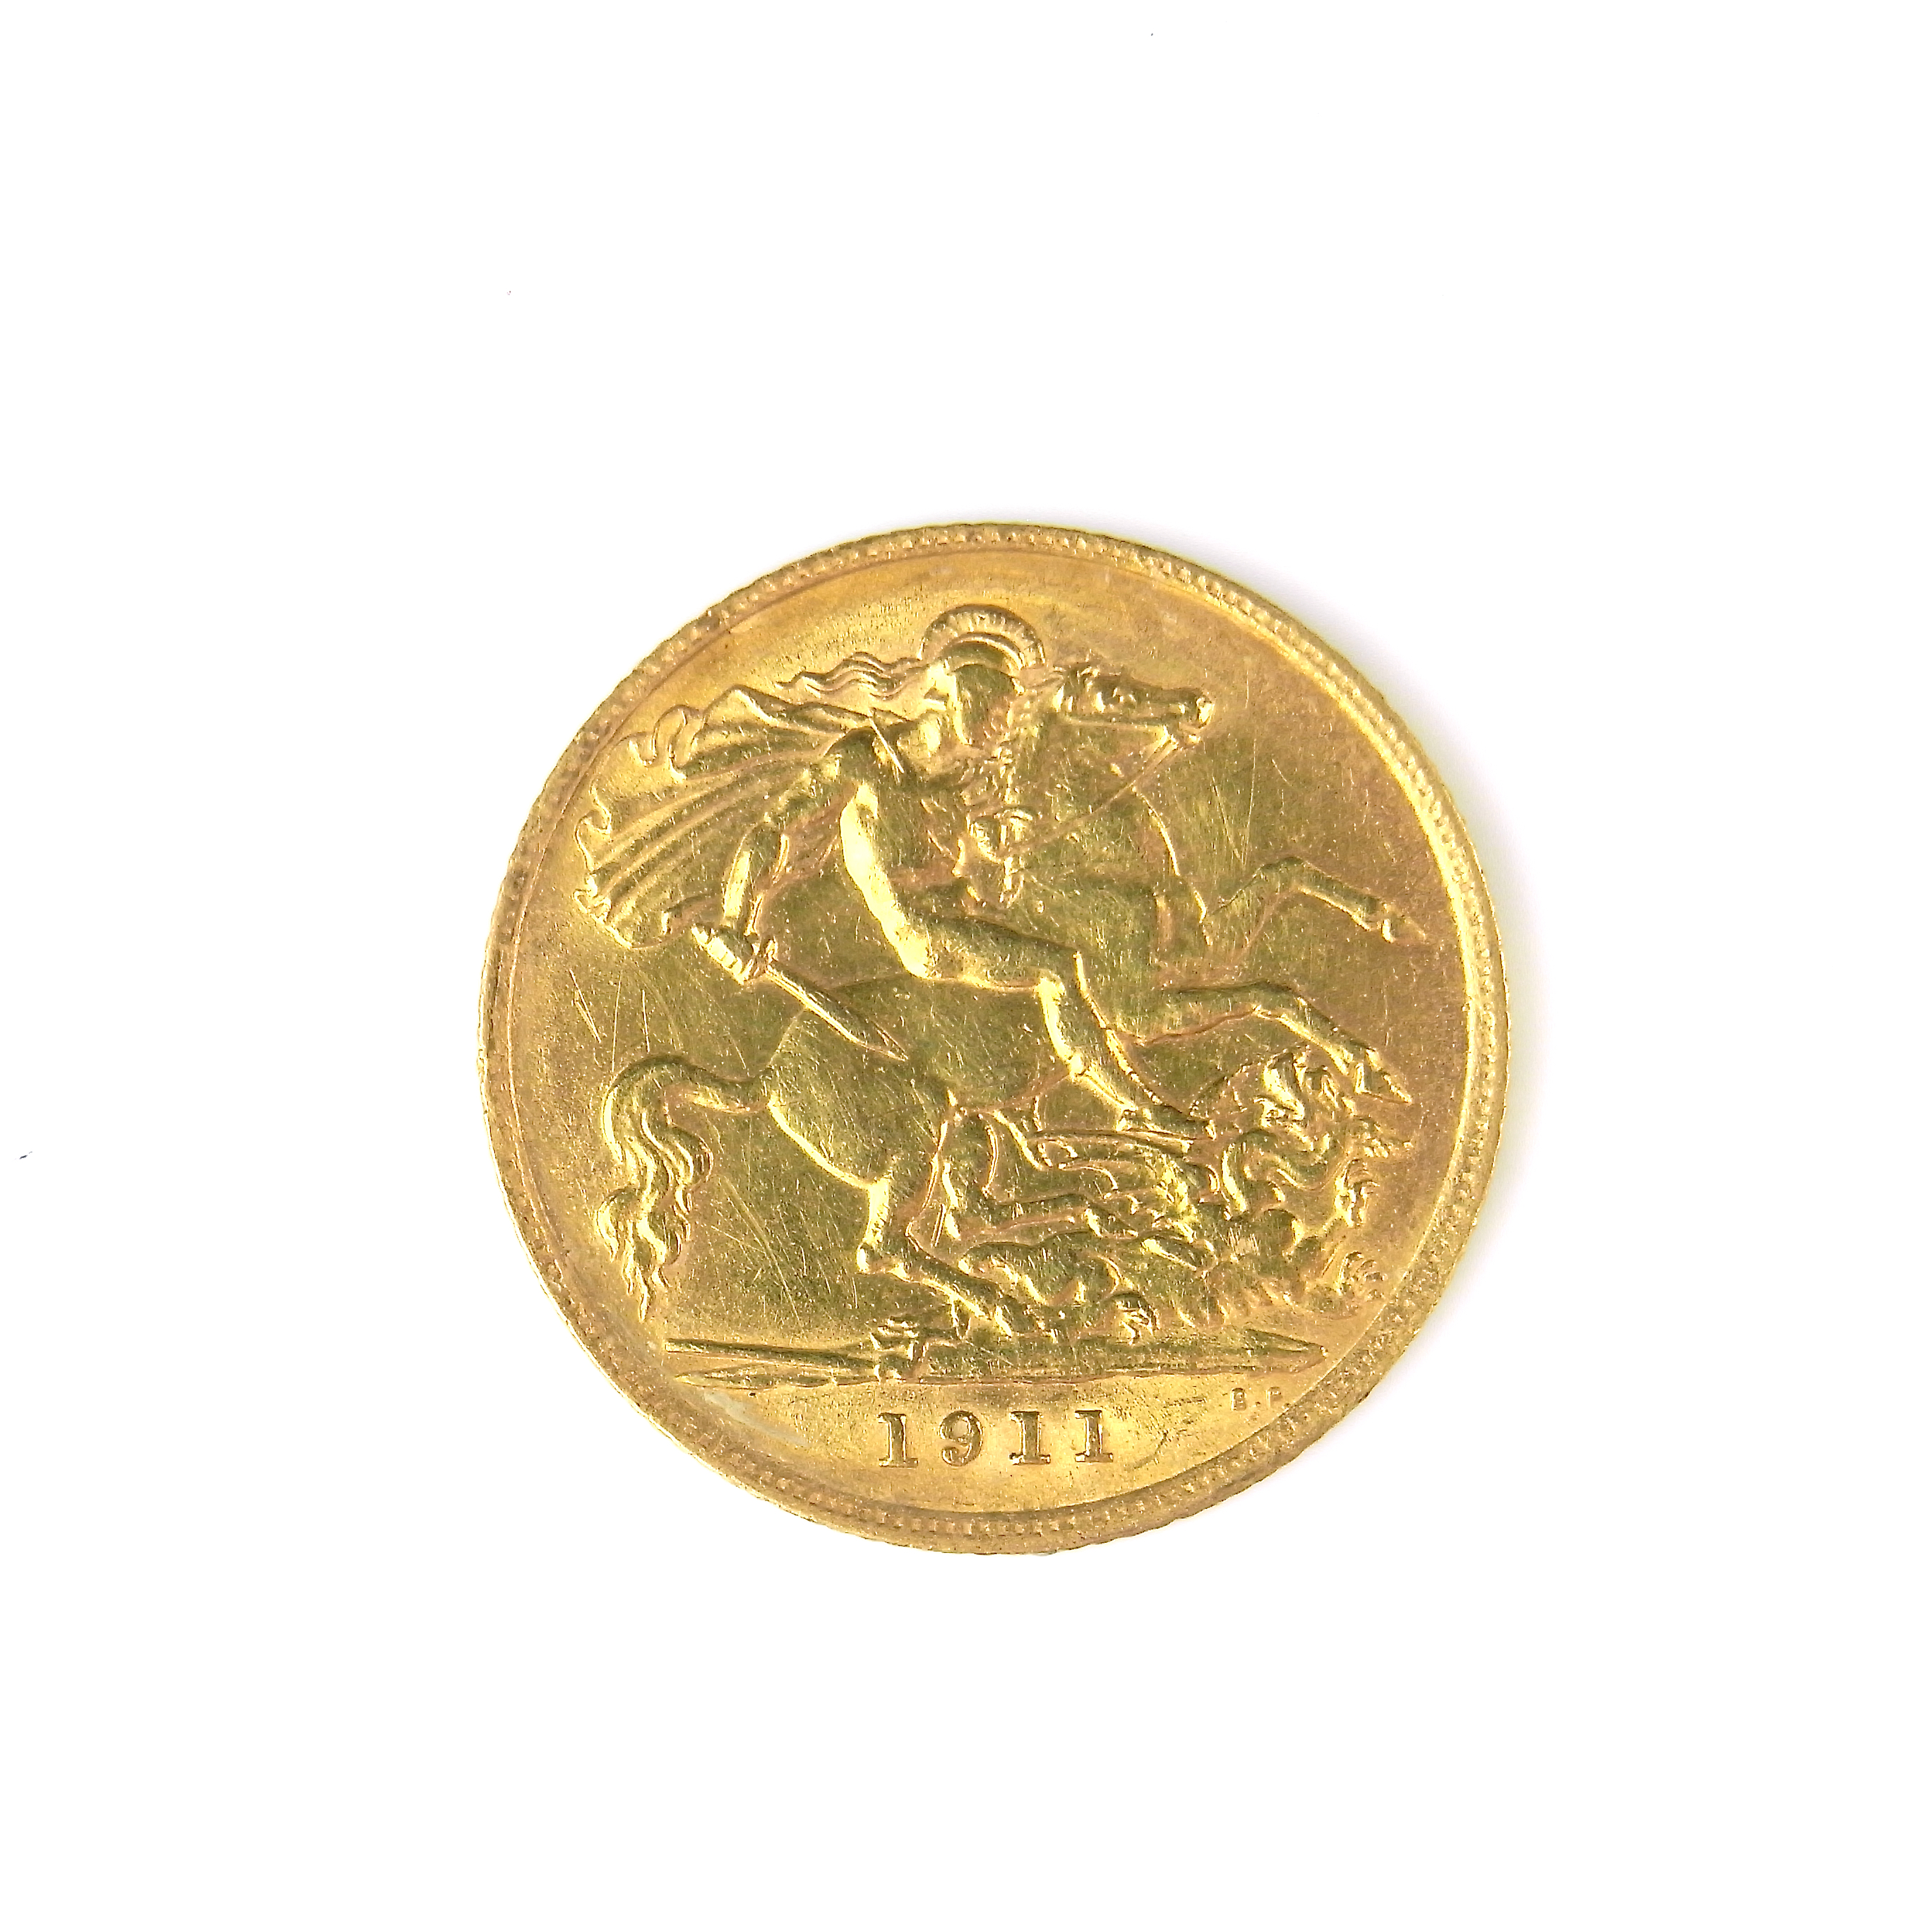 Gold half sovereign coin. - Image 2 of 2